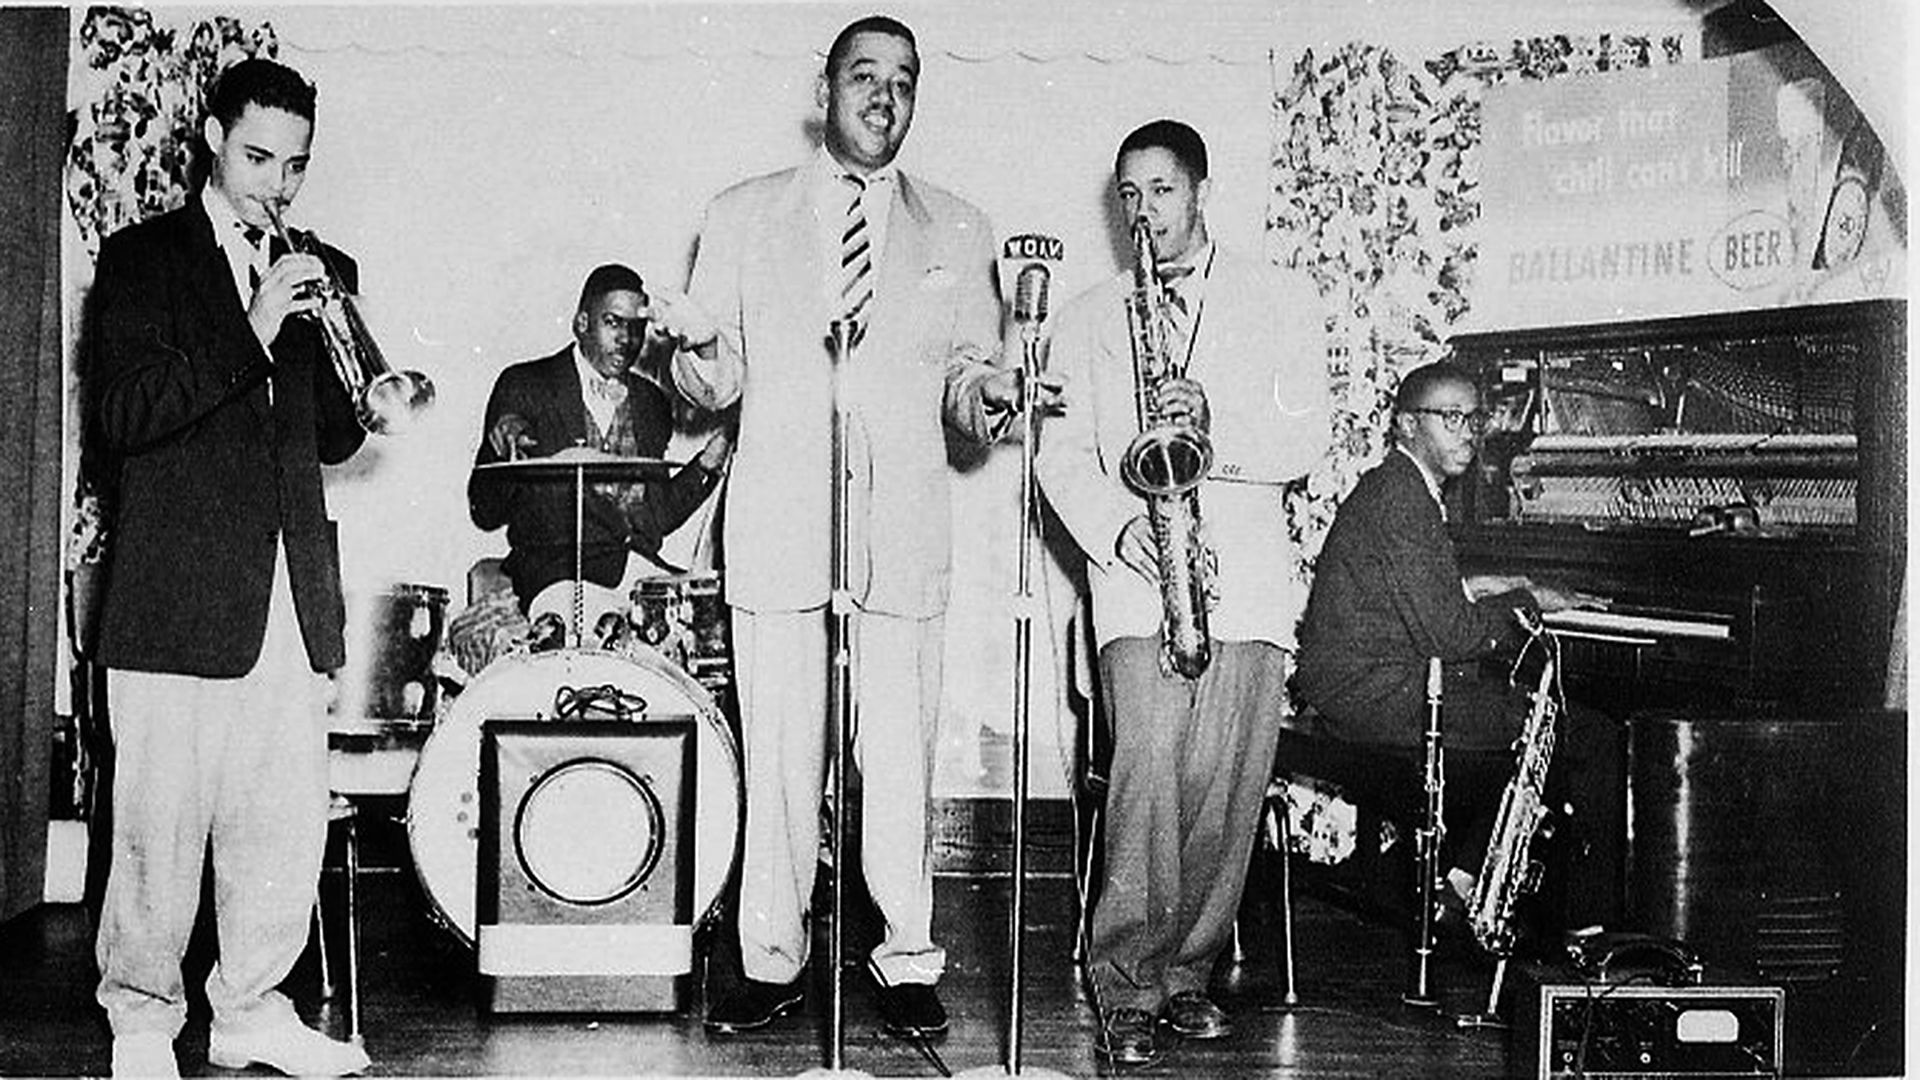 A band performs at the Excelsior Club in the late 1950s. Courtesy of the Robinson-Spangler Carolina Room at the Charlotte Mecklenburg Library